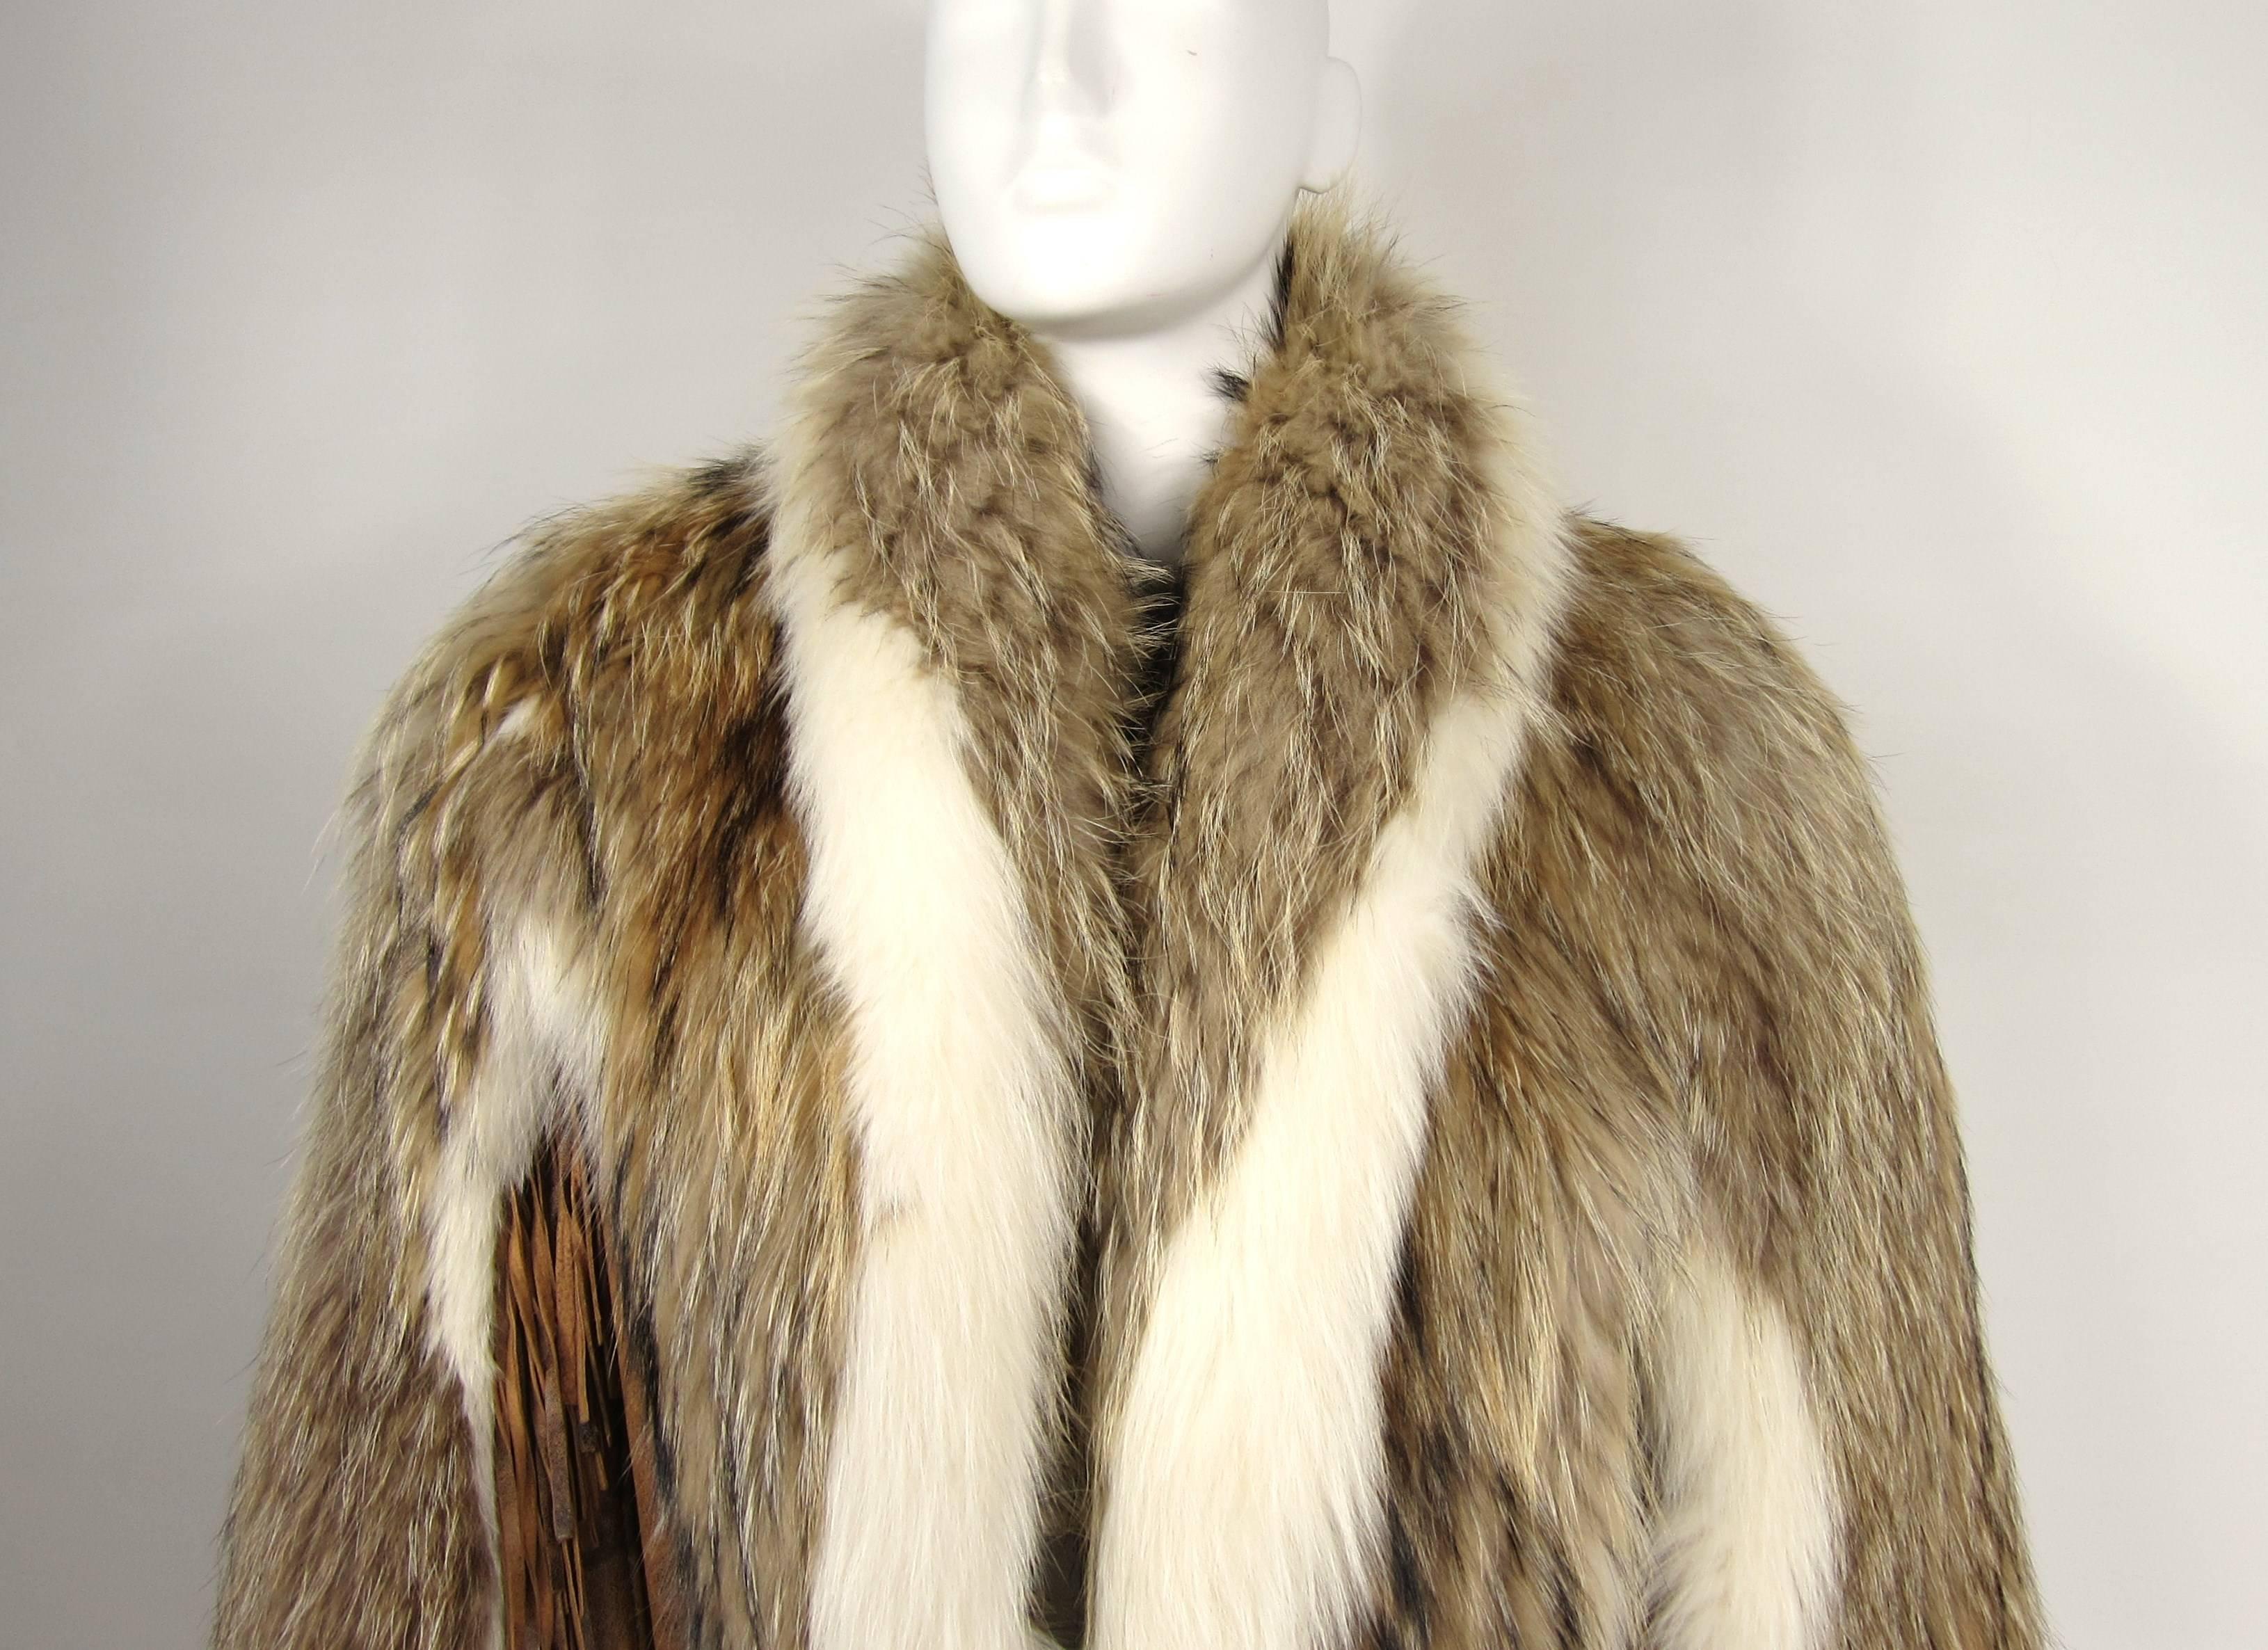 Statement piece with this 1990's Fringe Jacket. Leather jacket with accents over the shoulder of Coyote fur. Fringed on the arms and back. 2 clip closure, 2 slit pockets. Measuring approximately. Up to a 46 bust - Up to 48  waist - 40.5 length down